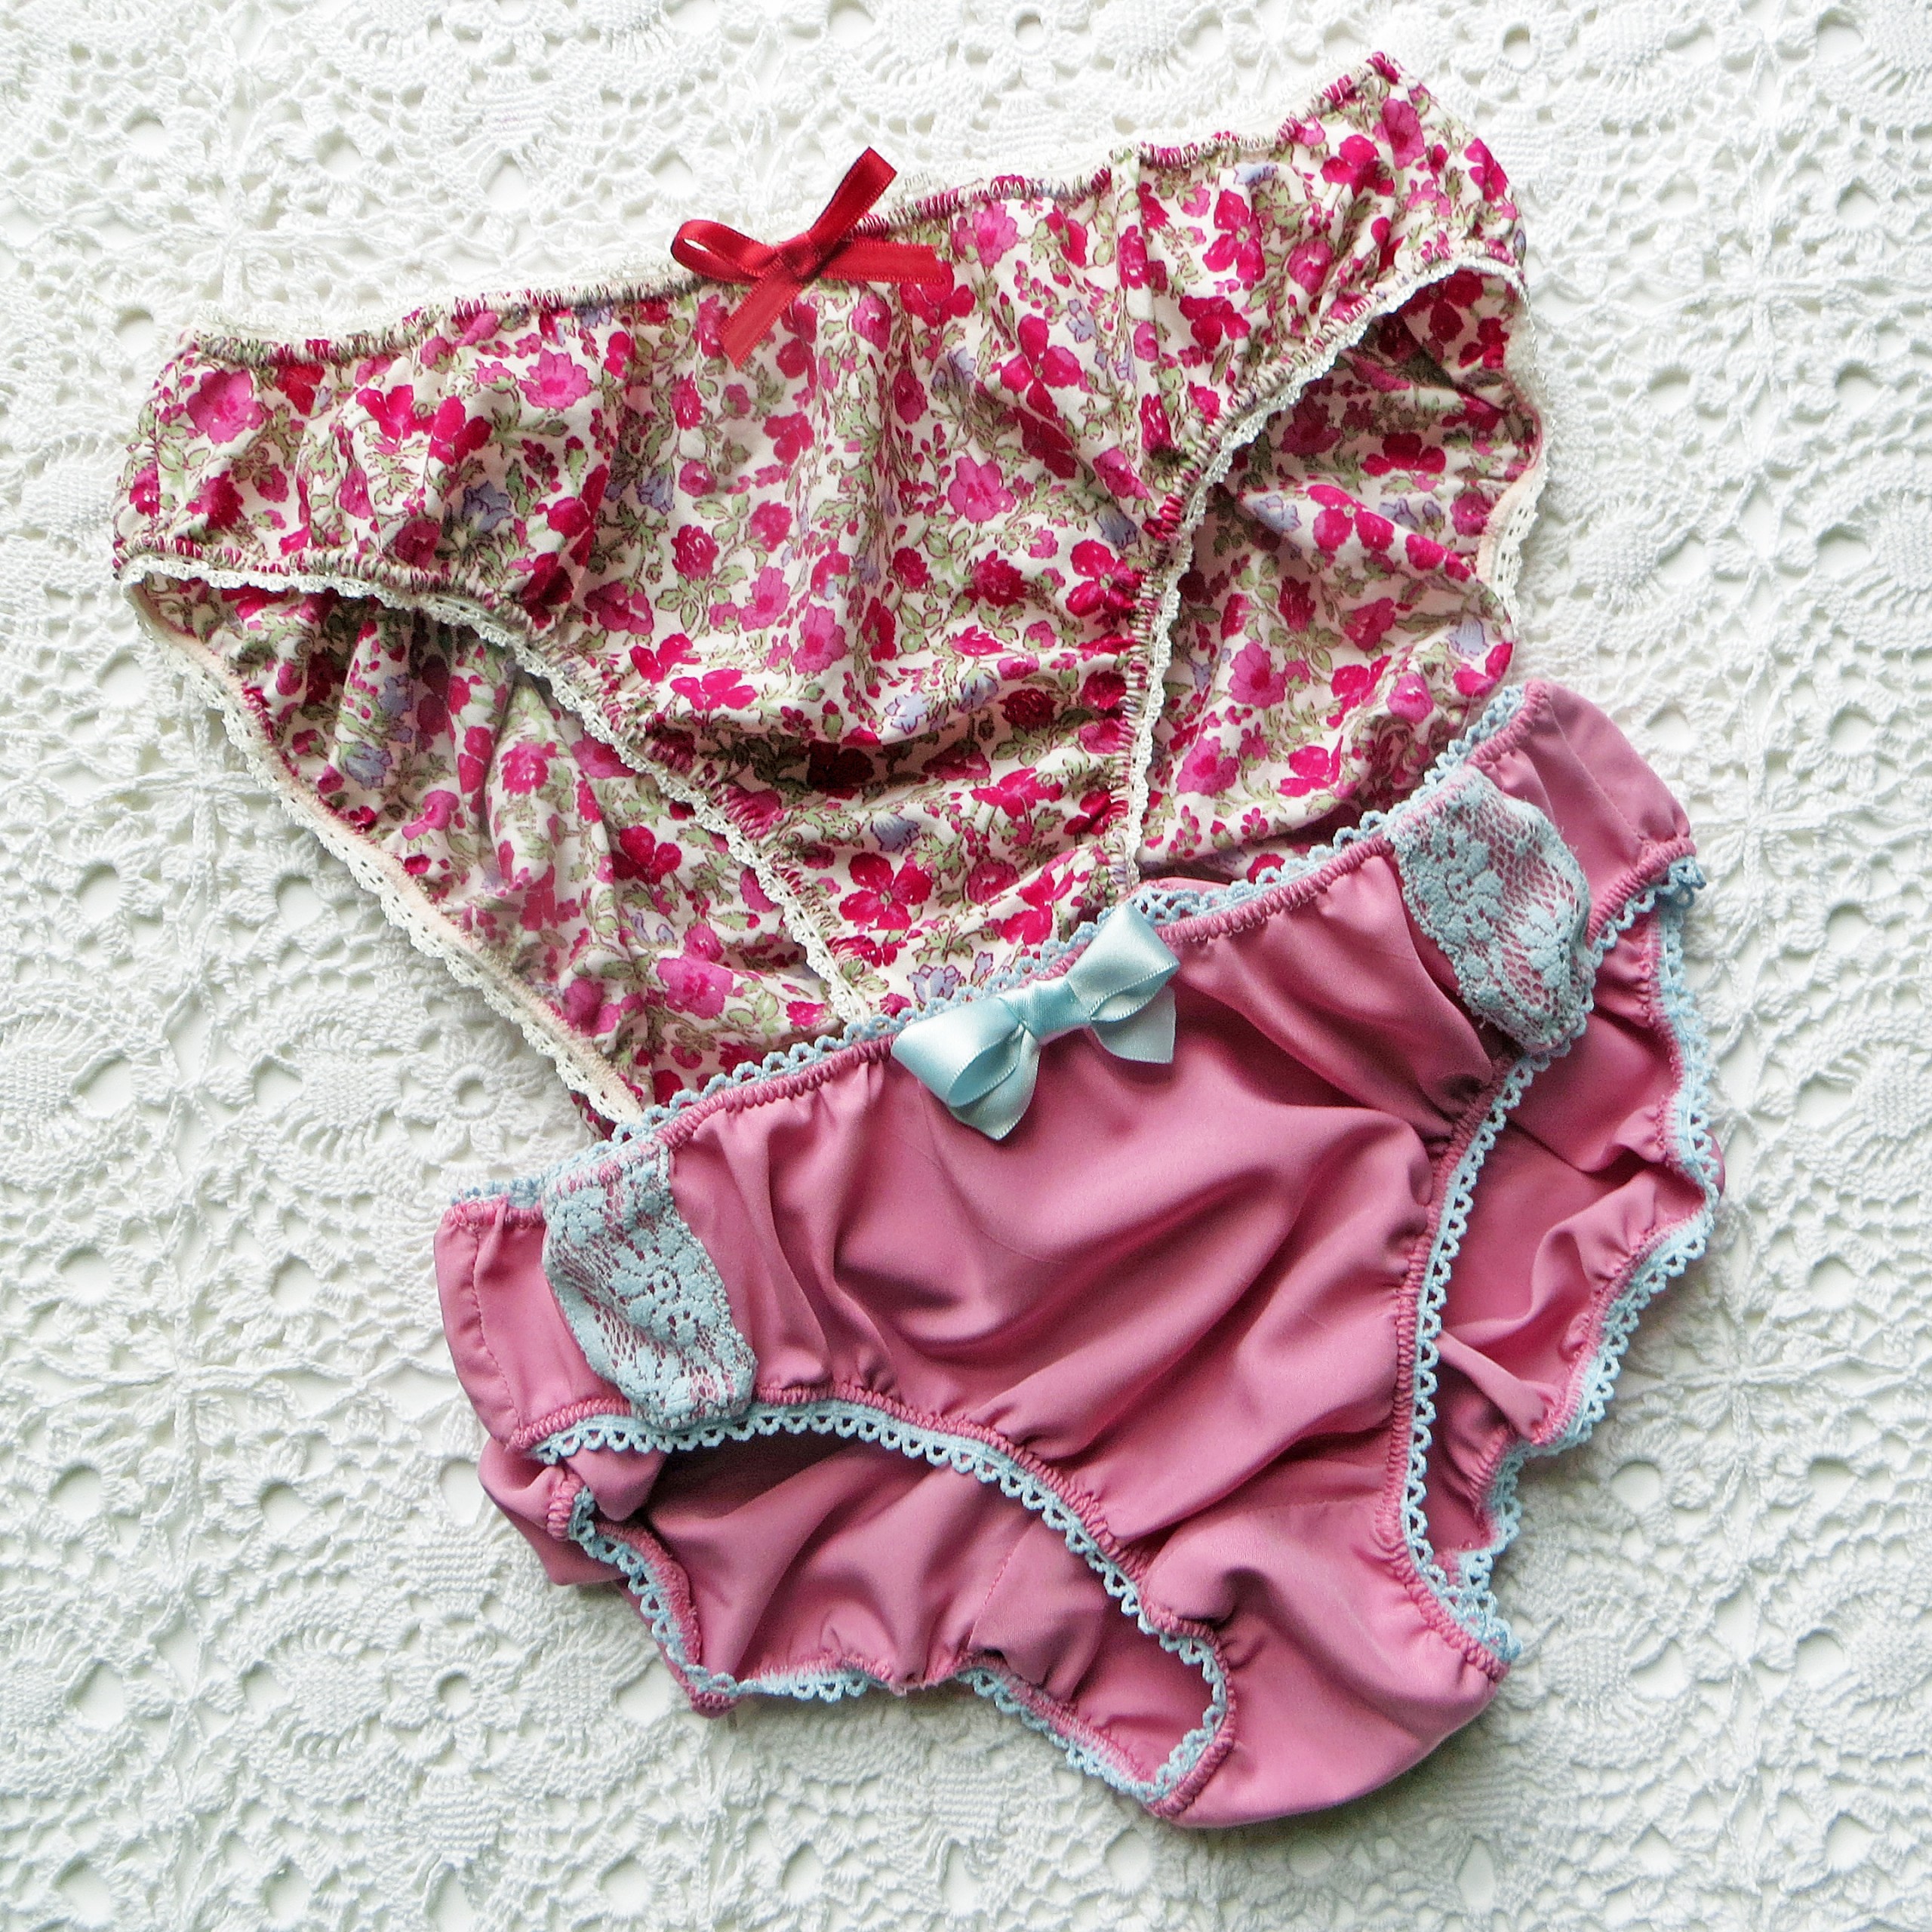 PRETTY KNICKERS. INTRO TO LINGERIE SEWING - SEW IT WITH LOVE I